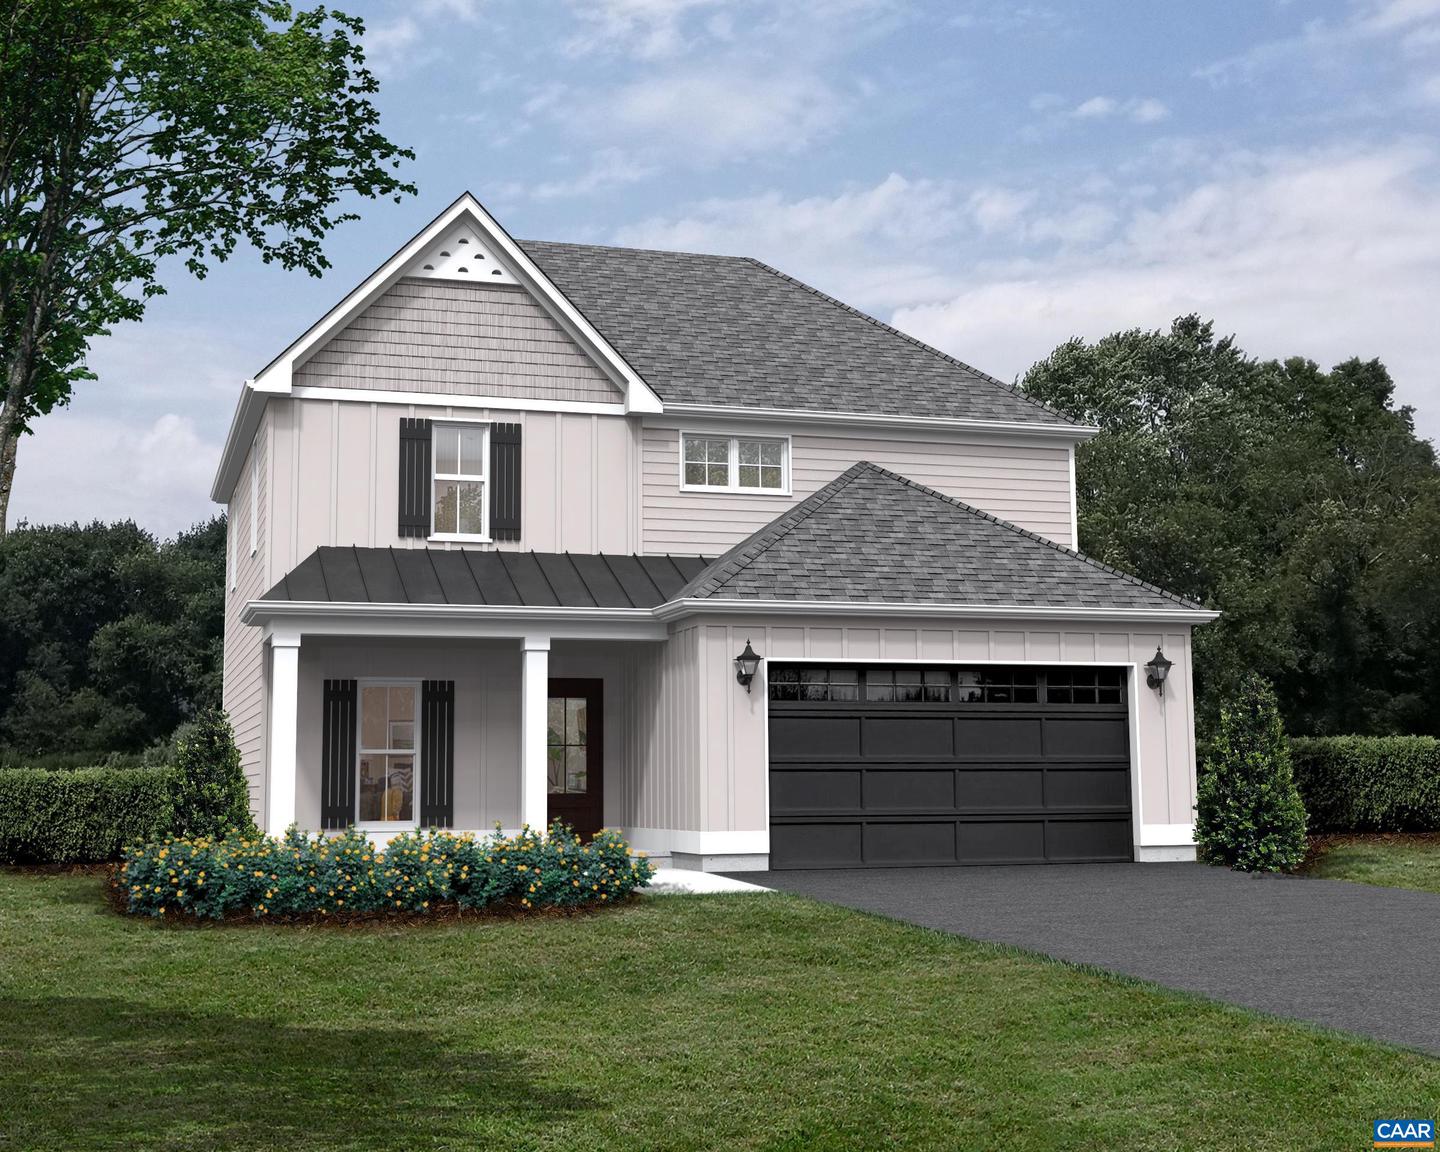 4024 MARIE CURIE CT #LOT 4, CHARLOTTESVILLE, Virginia 22903, 3 Bedrooms Bedrooms, ,2 BathroomsBathrooms,Residential,For sale,4024 MARIE CURIE CT #LOT 4,650651 MLS # 650651